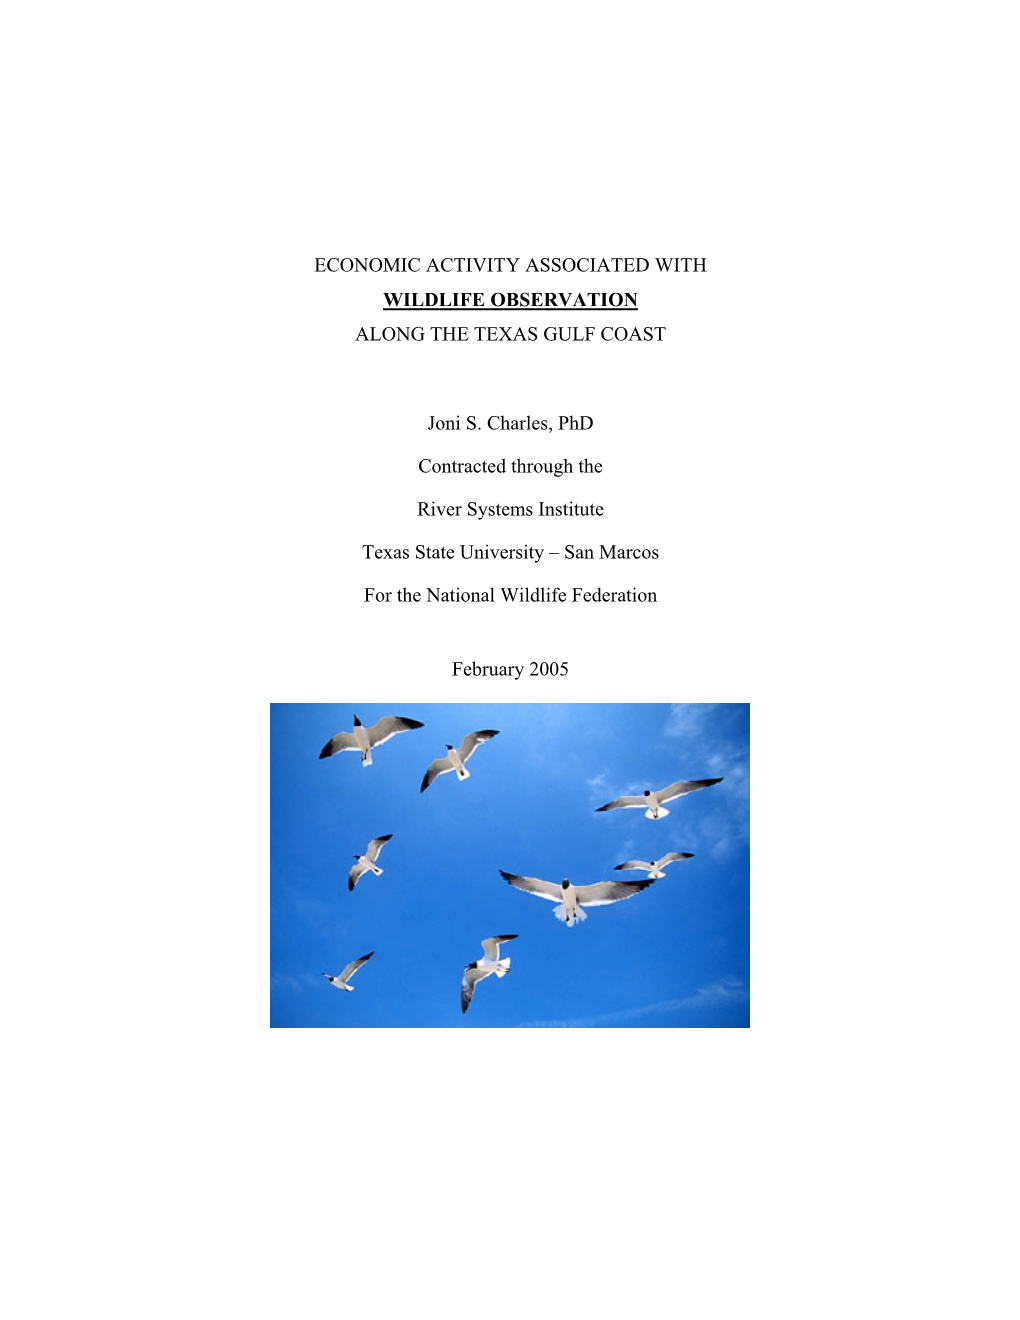 Economic Activity Associated with Wildlife Observation Along the Texas Gulf Coast